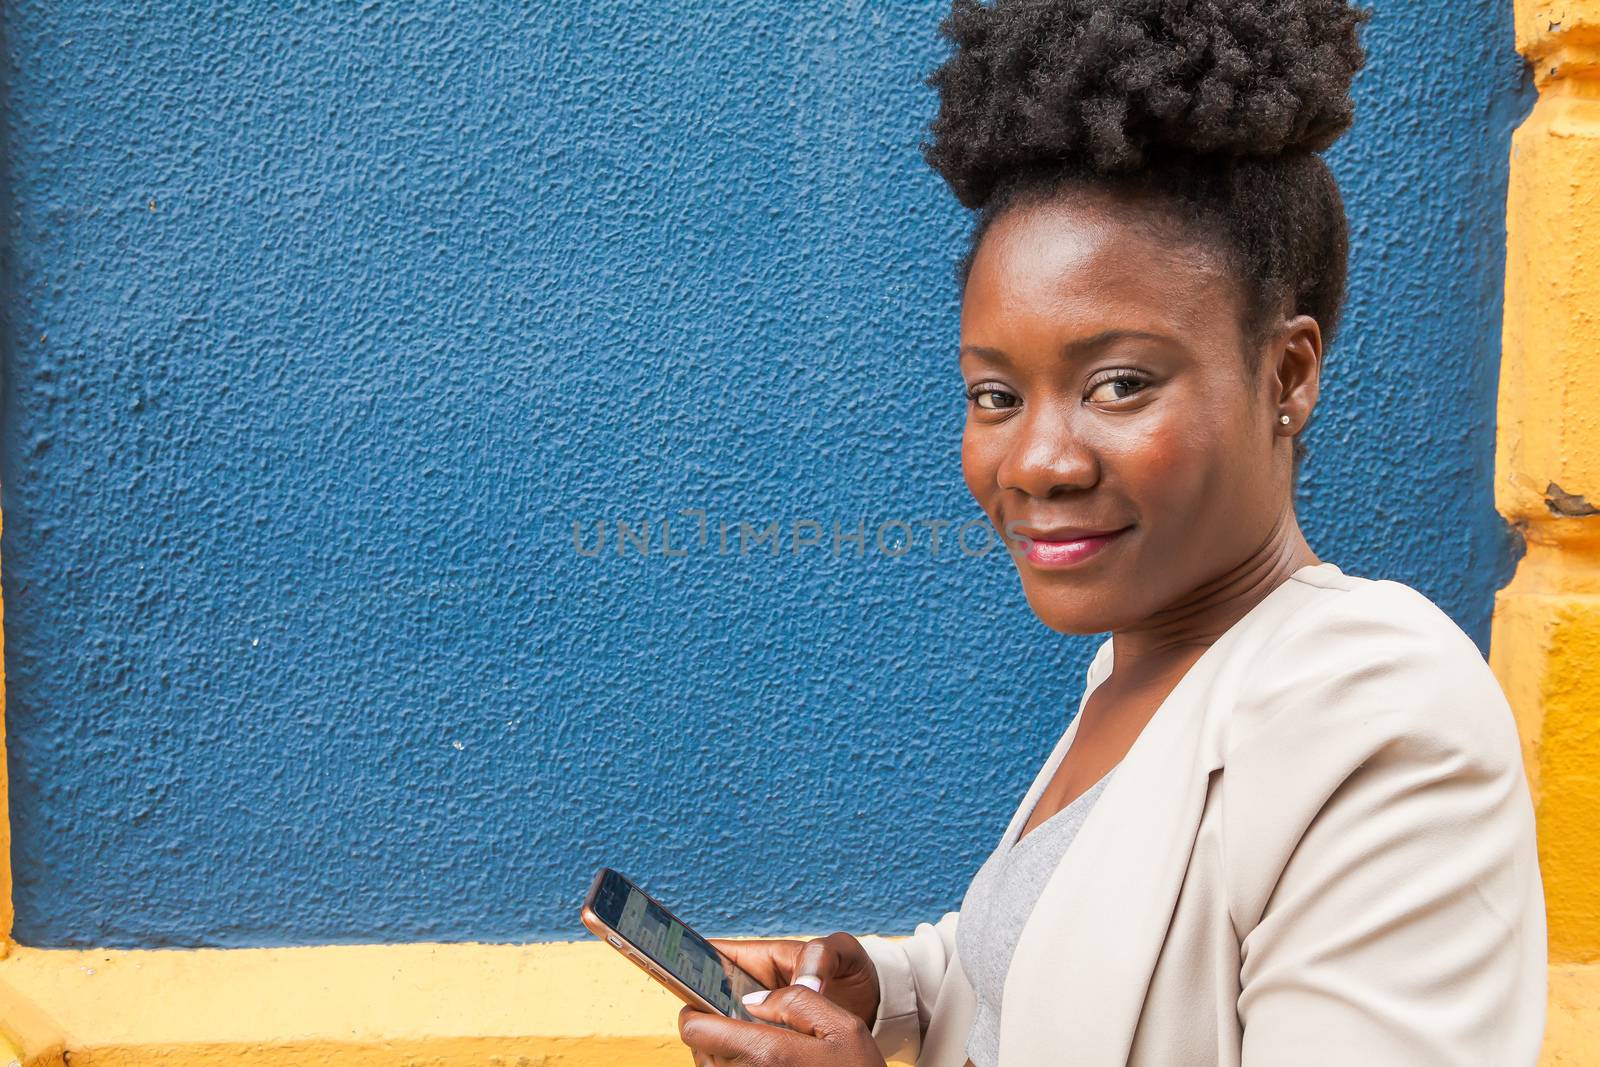 Medium shot of an african young woman in sportswear looking at his mobile phone with a colorful wall blue and yellow